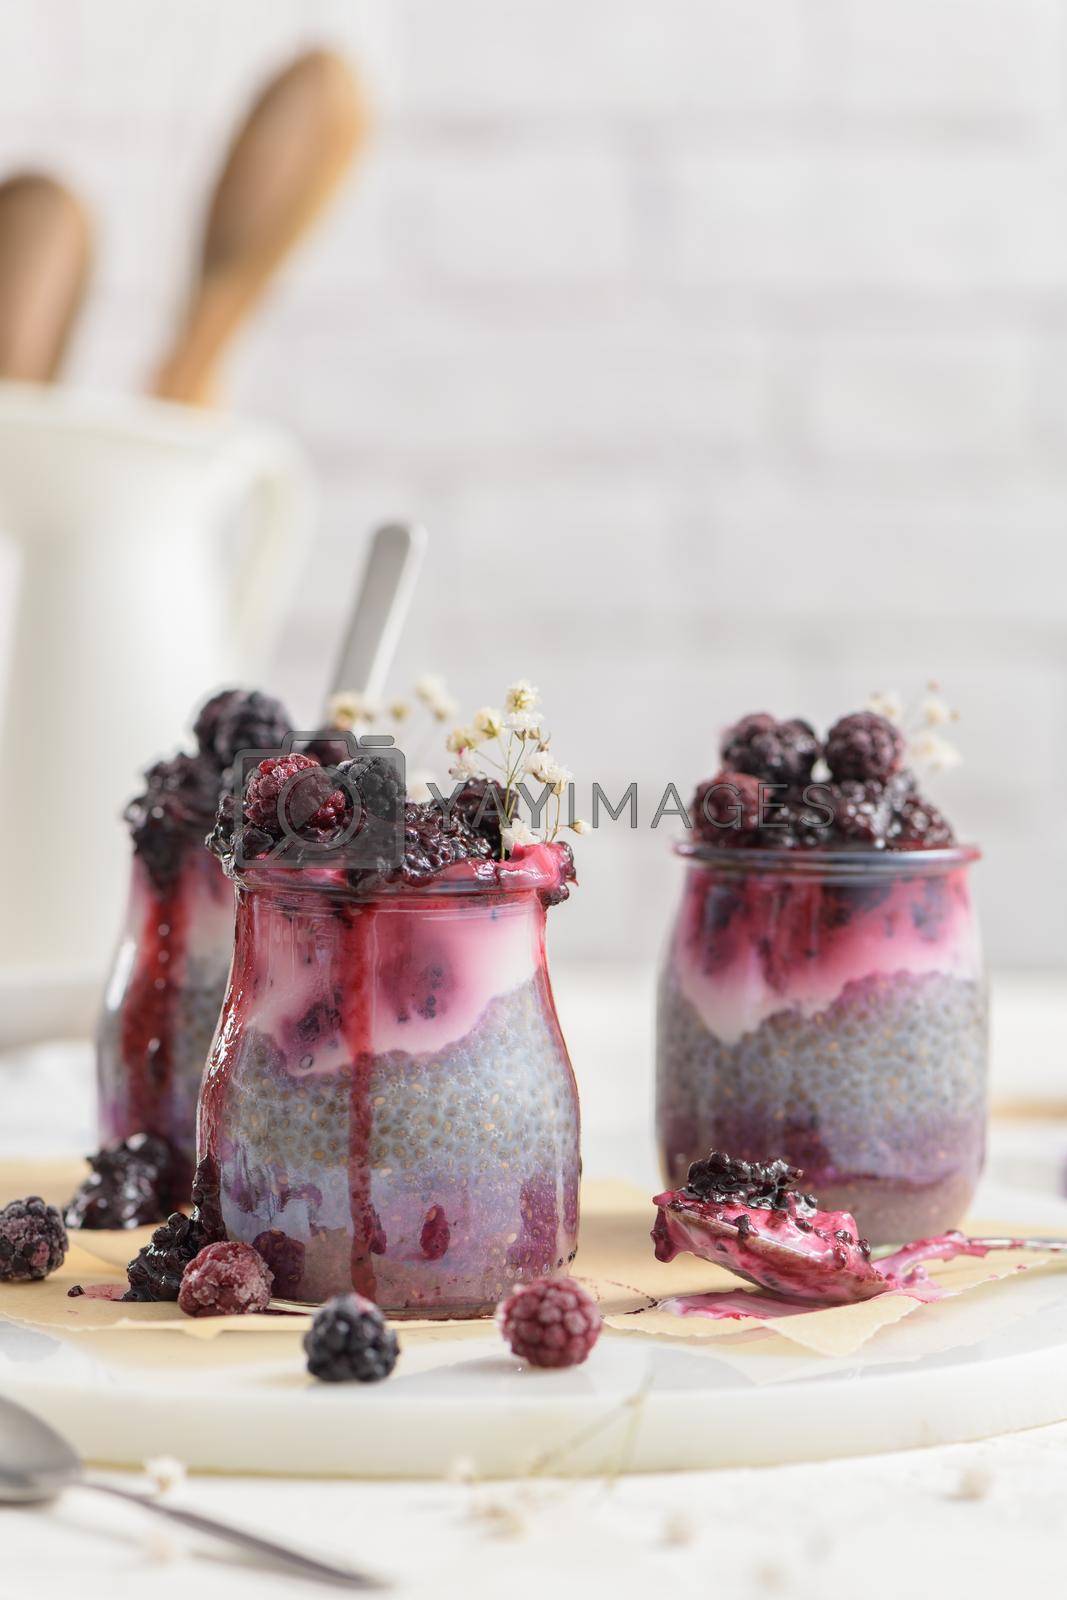 Royalty free image of Chia pudding with blackberries by homydesign